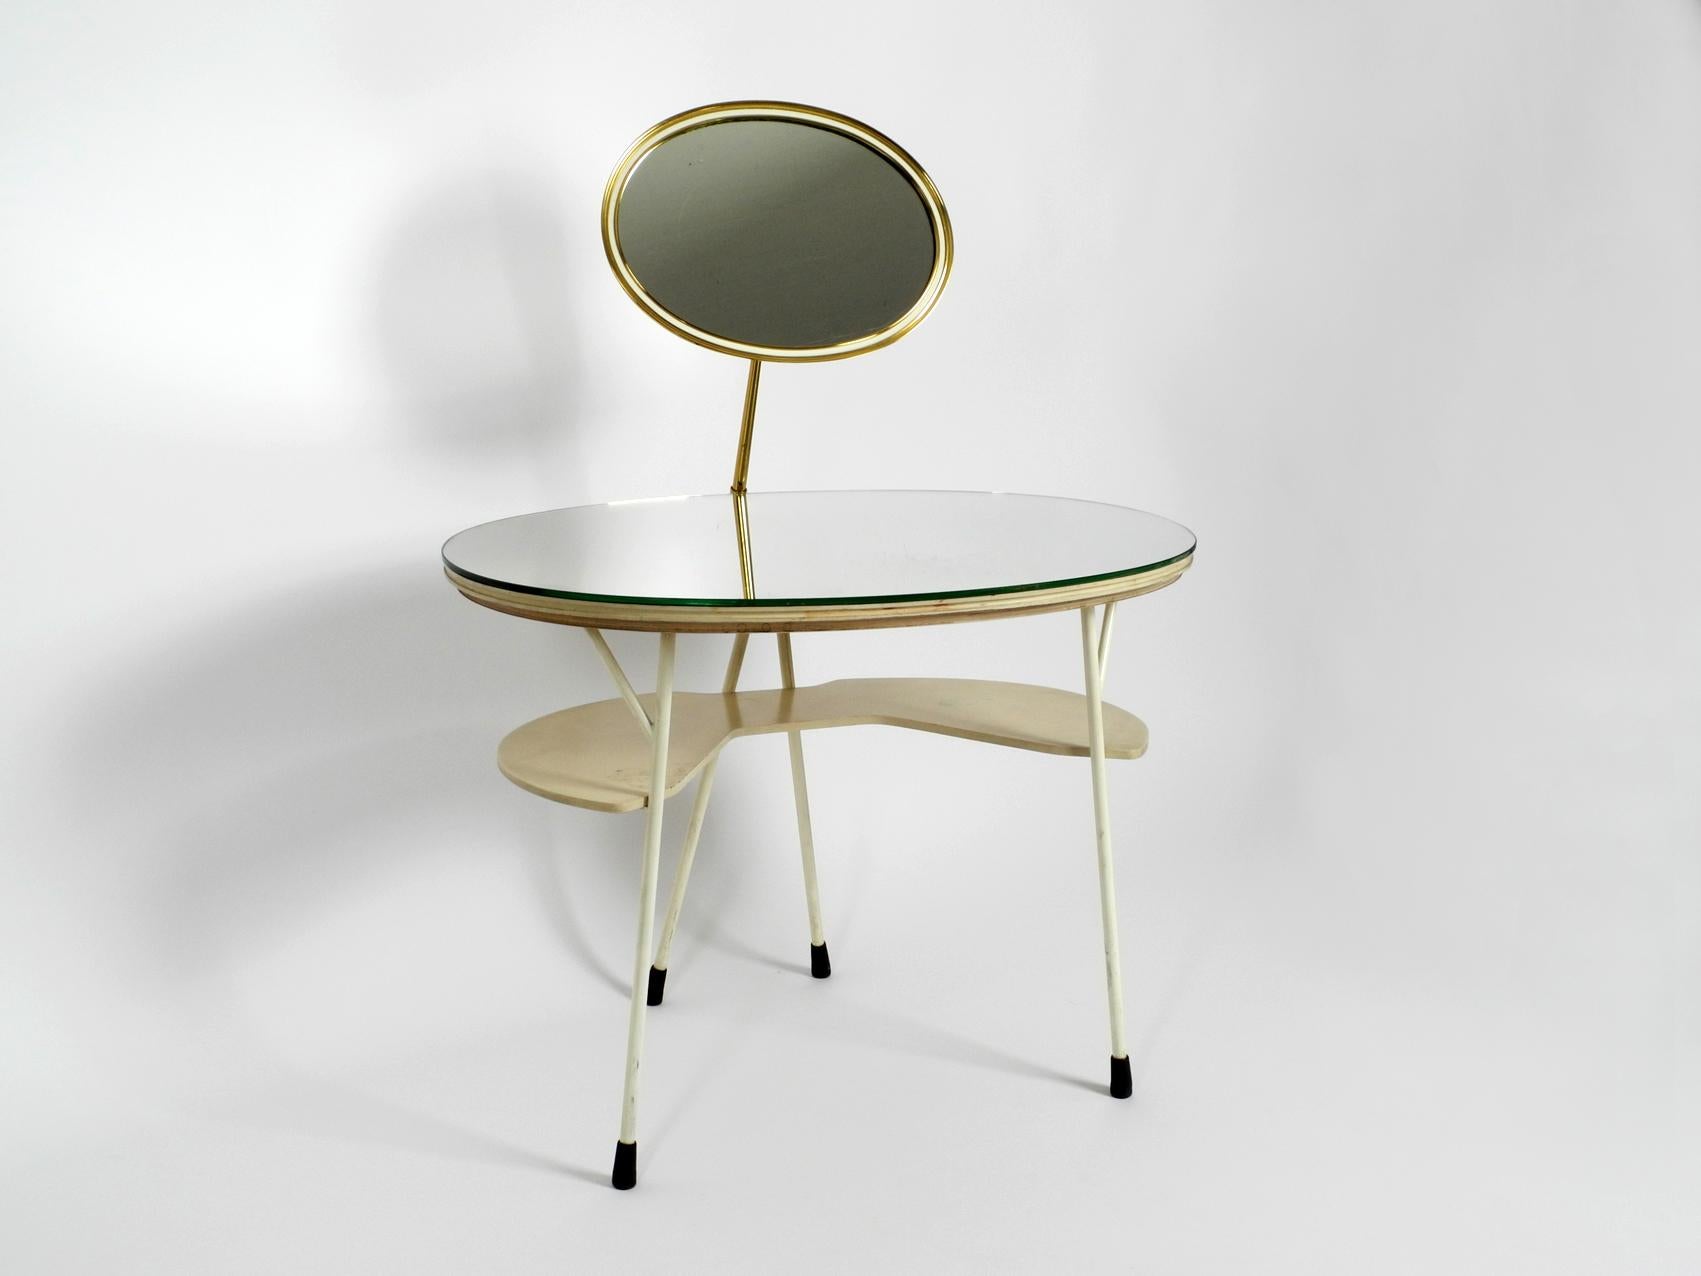 Very rare Mid-Century Modern make up mirror table. 
Manufactured by Vereinigte Werkstätten. Made in Germany. 
The dressing table is made of wood with a mirror surface and a lower shelf made of painted wood. A second oval heavy mirror is attached